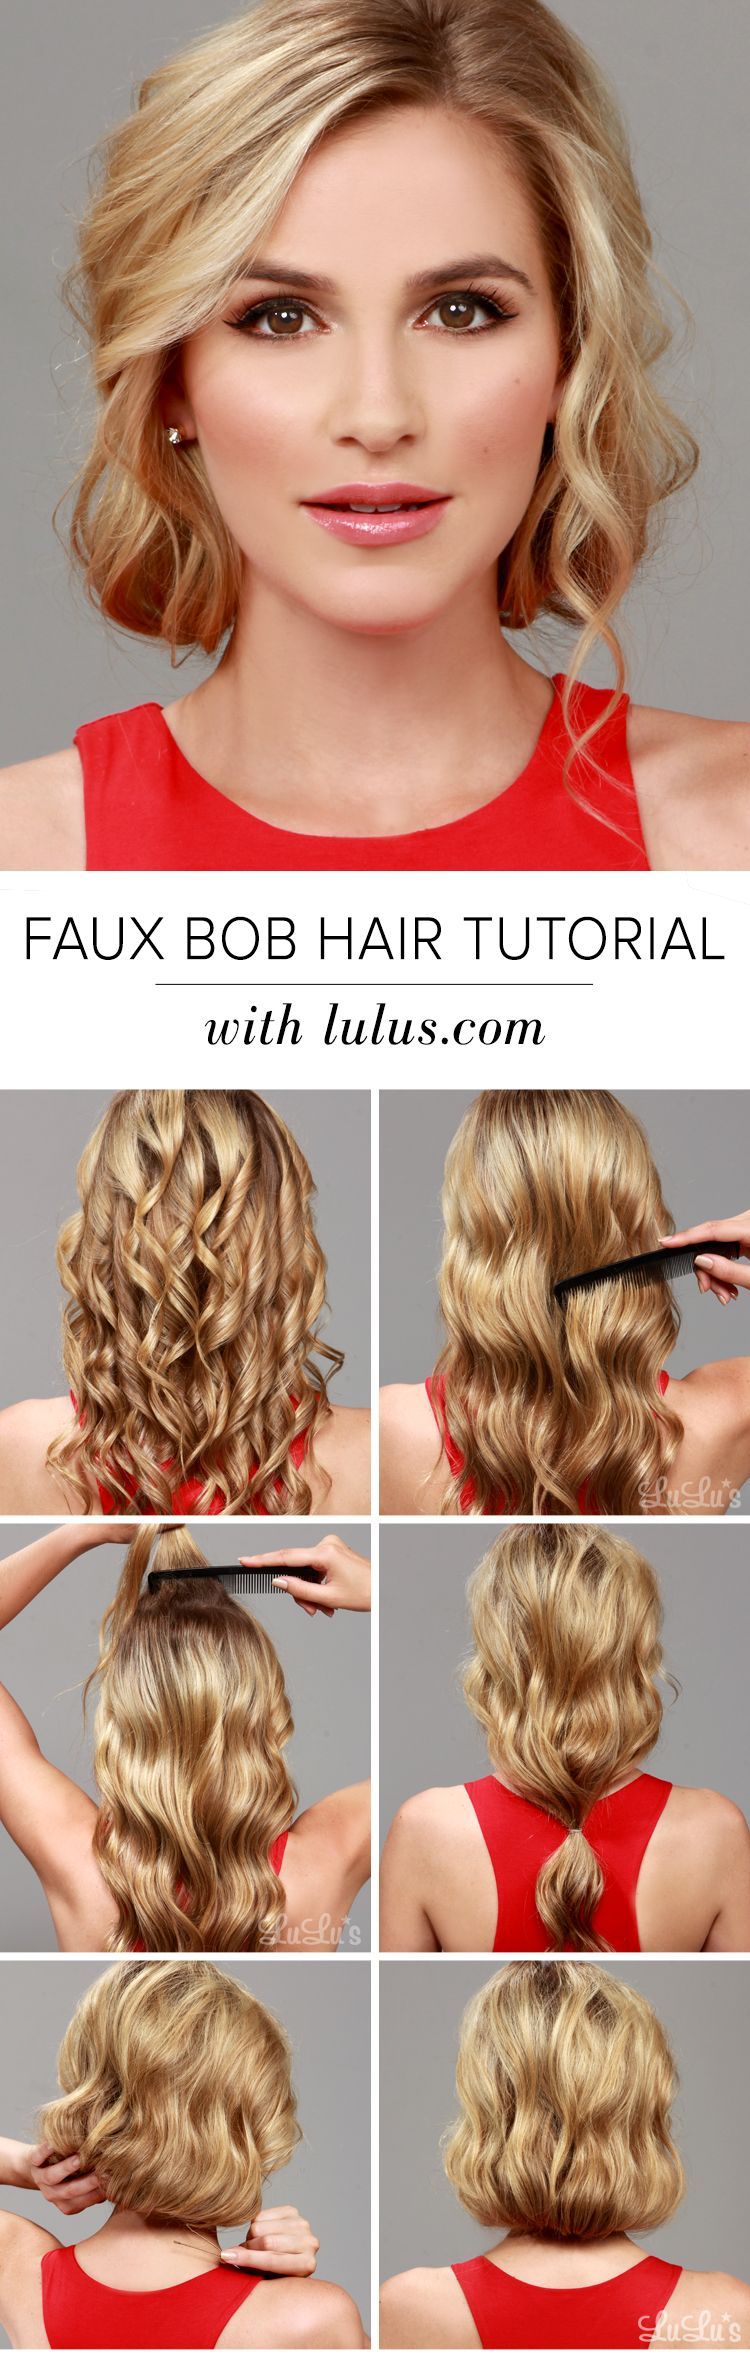 Are you loving the bob trend, but hate the thought of parting with your long tresses? Give our Faux Bob Hair Tutorial a try and